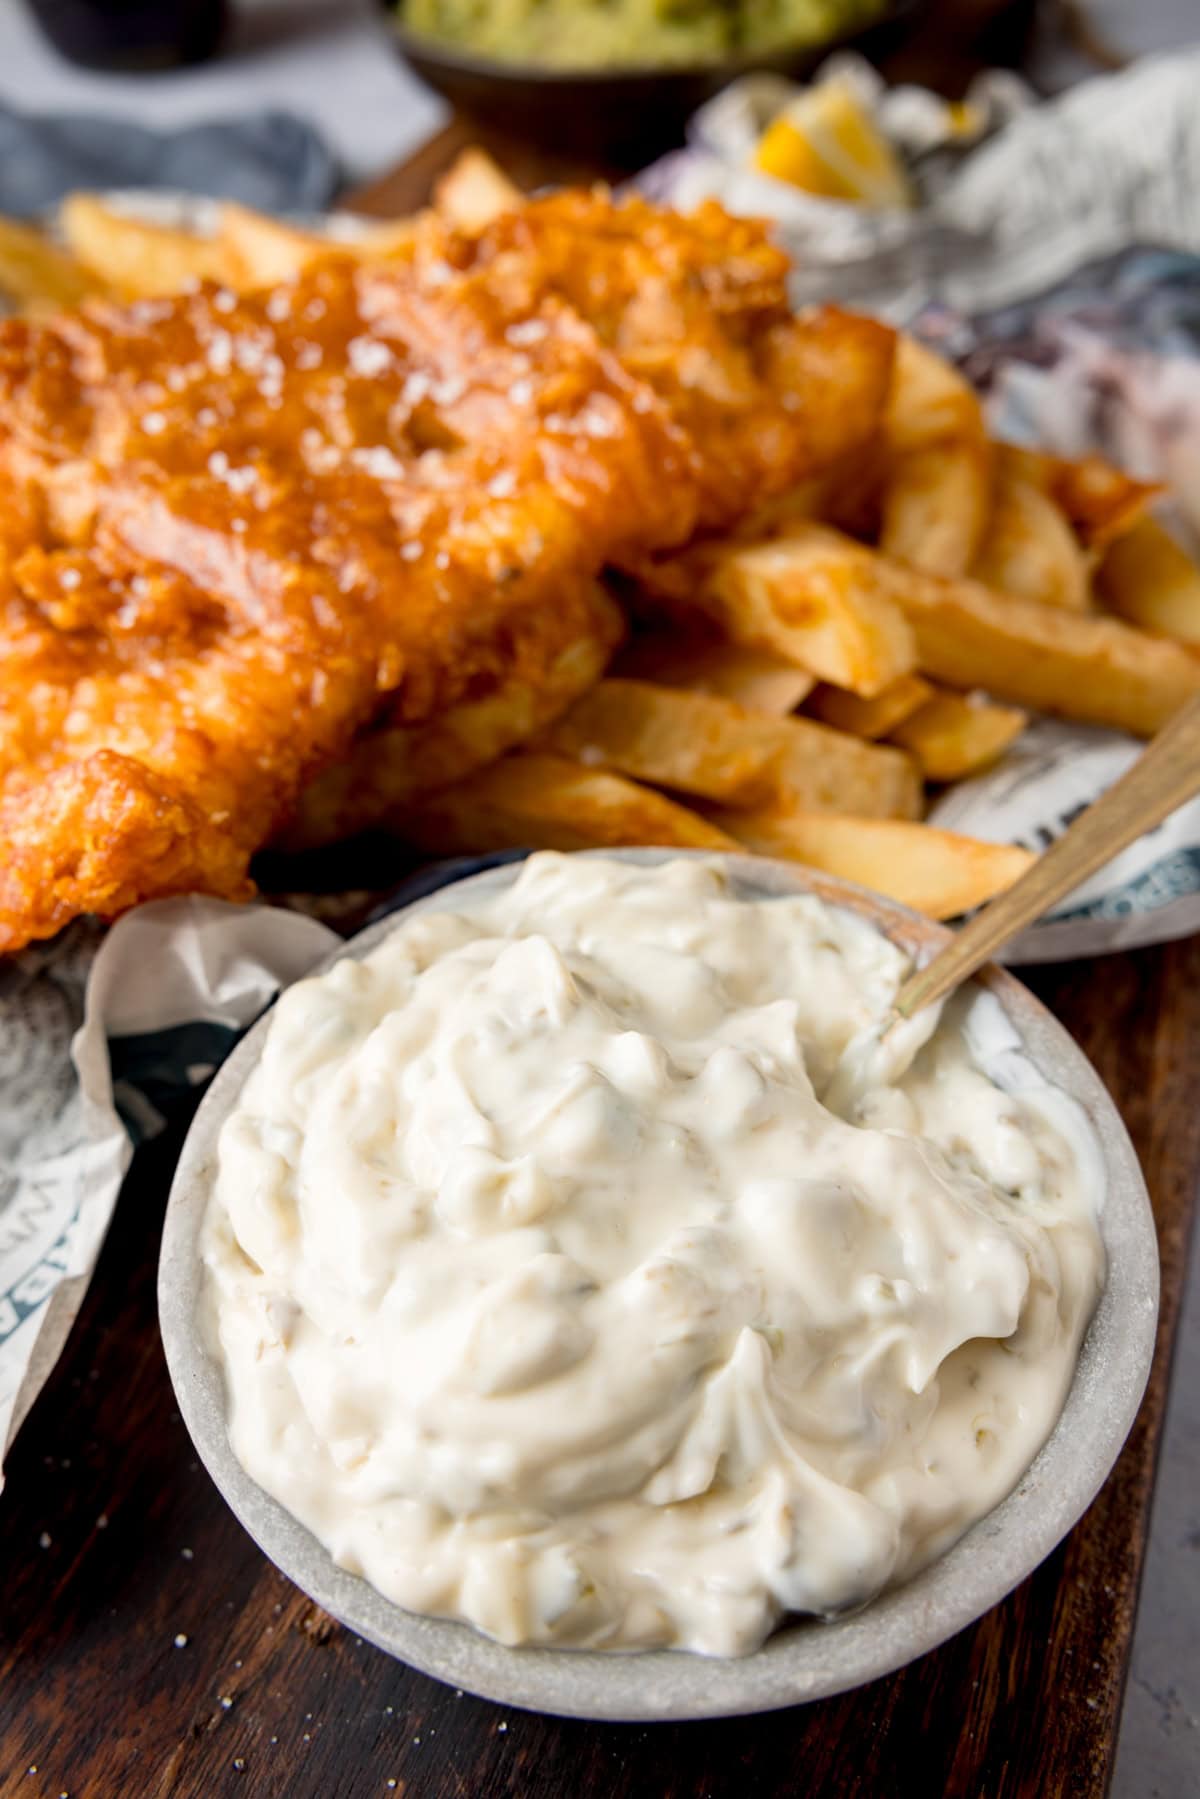 A tall shot of Chip Shop-Style Tartare Sauce. In the centre of the image, there is a light grey bowl of tartare sauce with a gold spoon sticking out of the left of the bowl. In the top of the background, there are some Chip Shop-Style Fish and Chips on some newspaper. The food is placed on a dark wooden board.